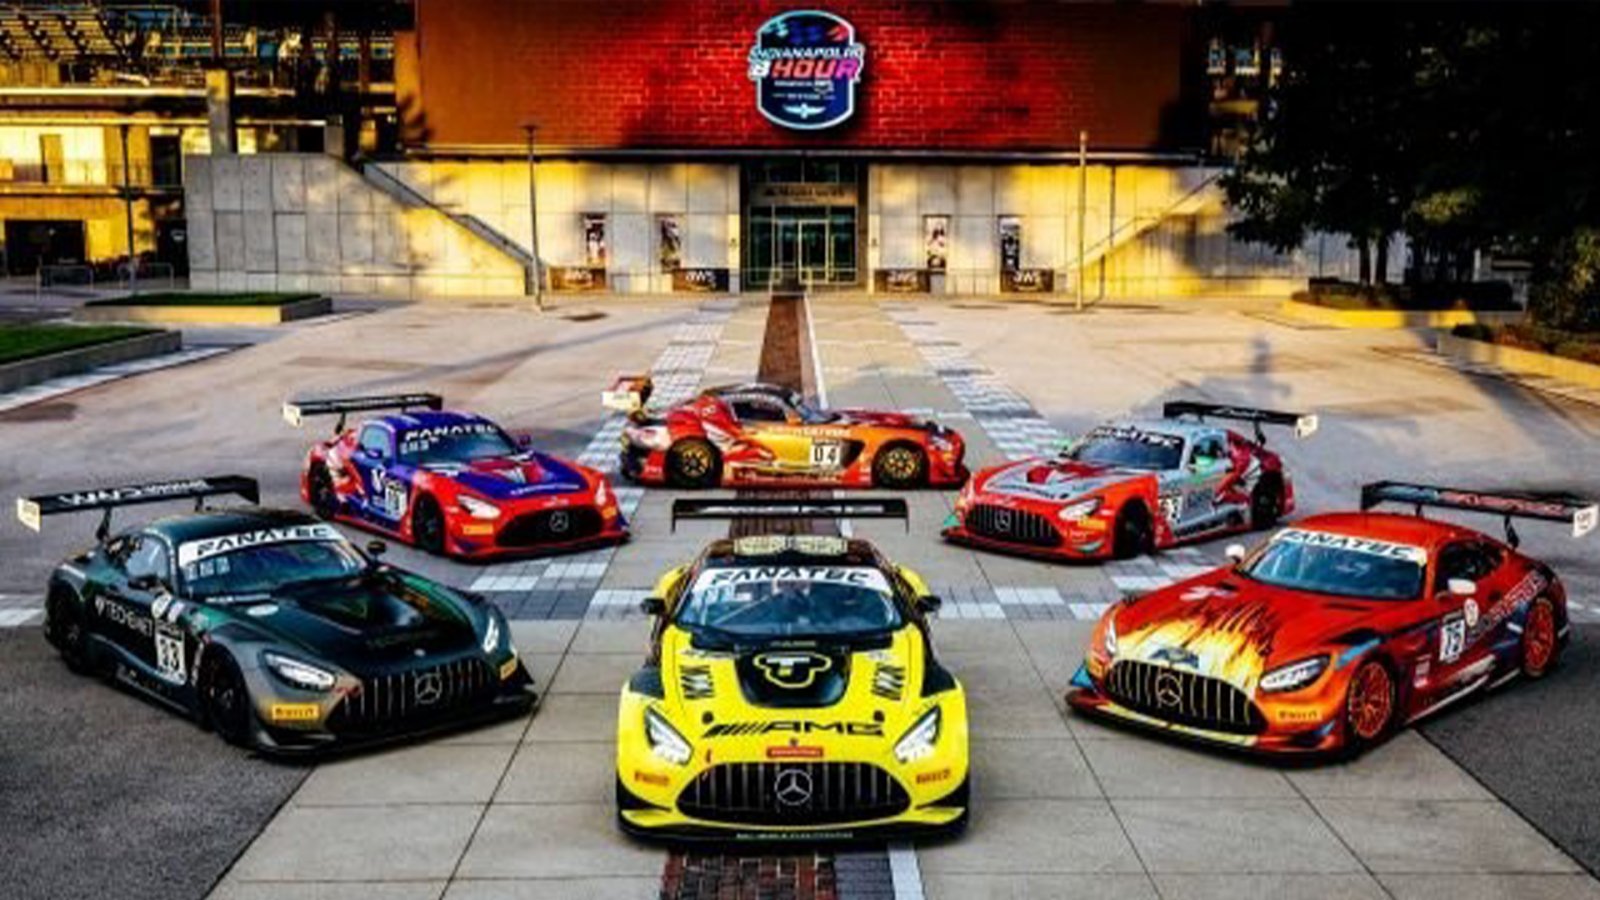 Seven Mercedes-AMG GT3 Entries Compete in Dual Intercontinental GT Challenge and Season-Ending Fanatec GT World Challenge Indianapolis 8 Hour at Indianapolis Motor Speedway